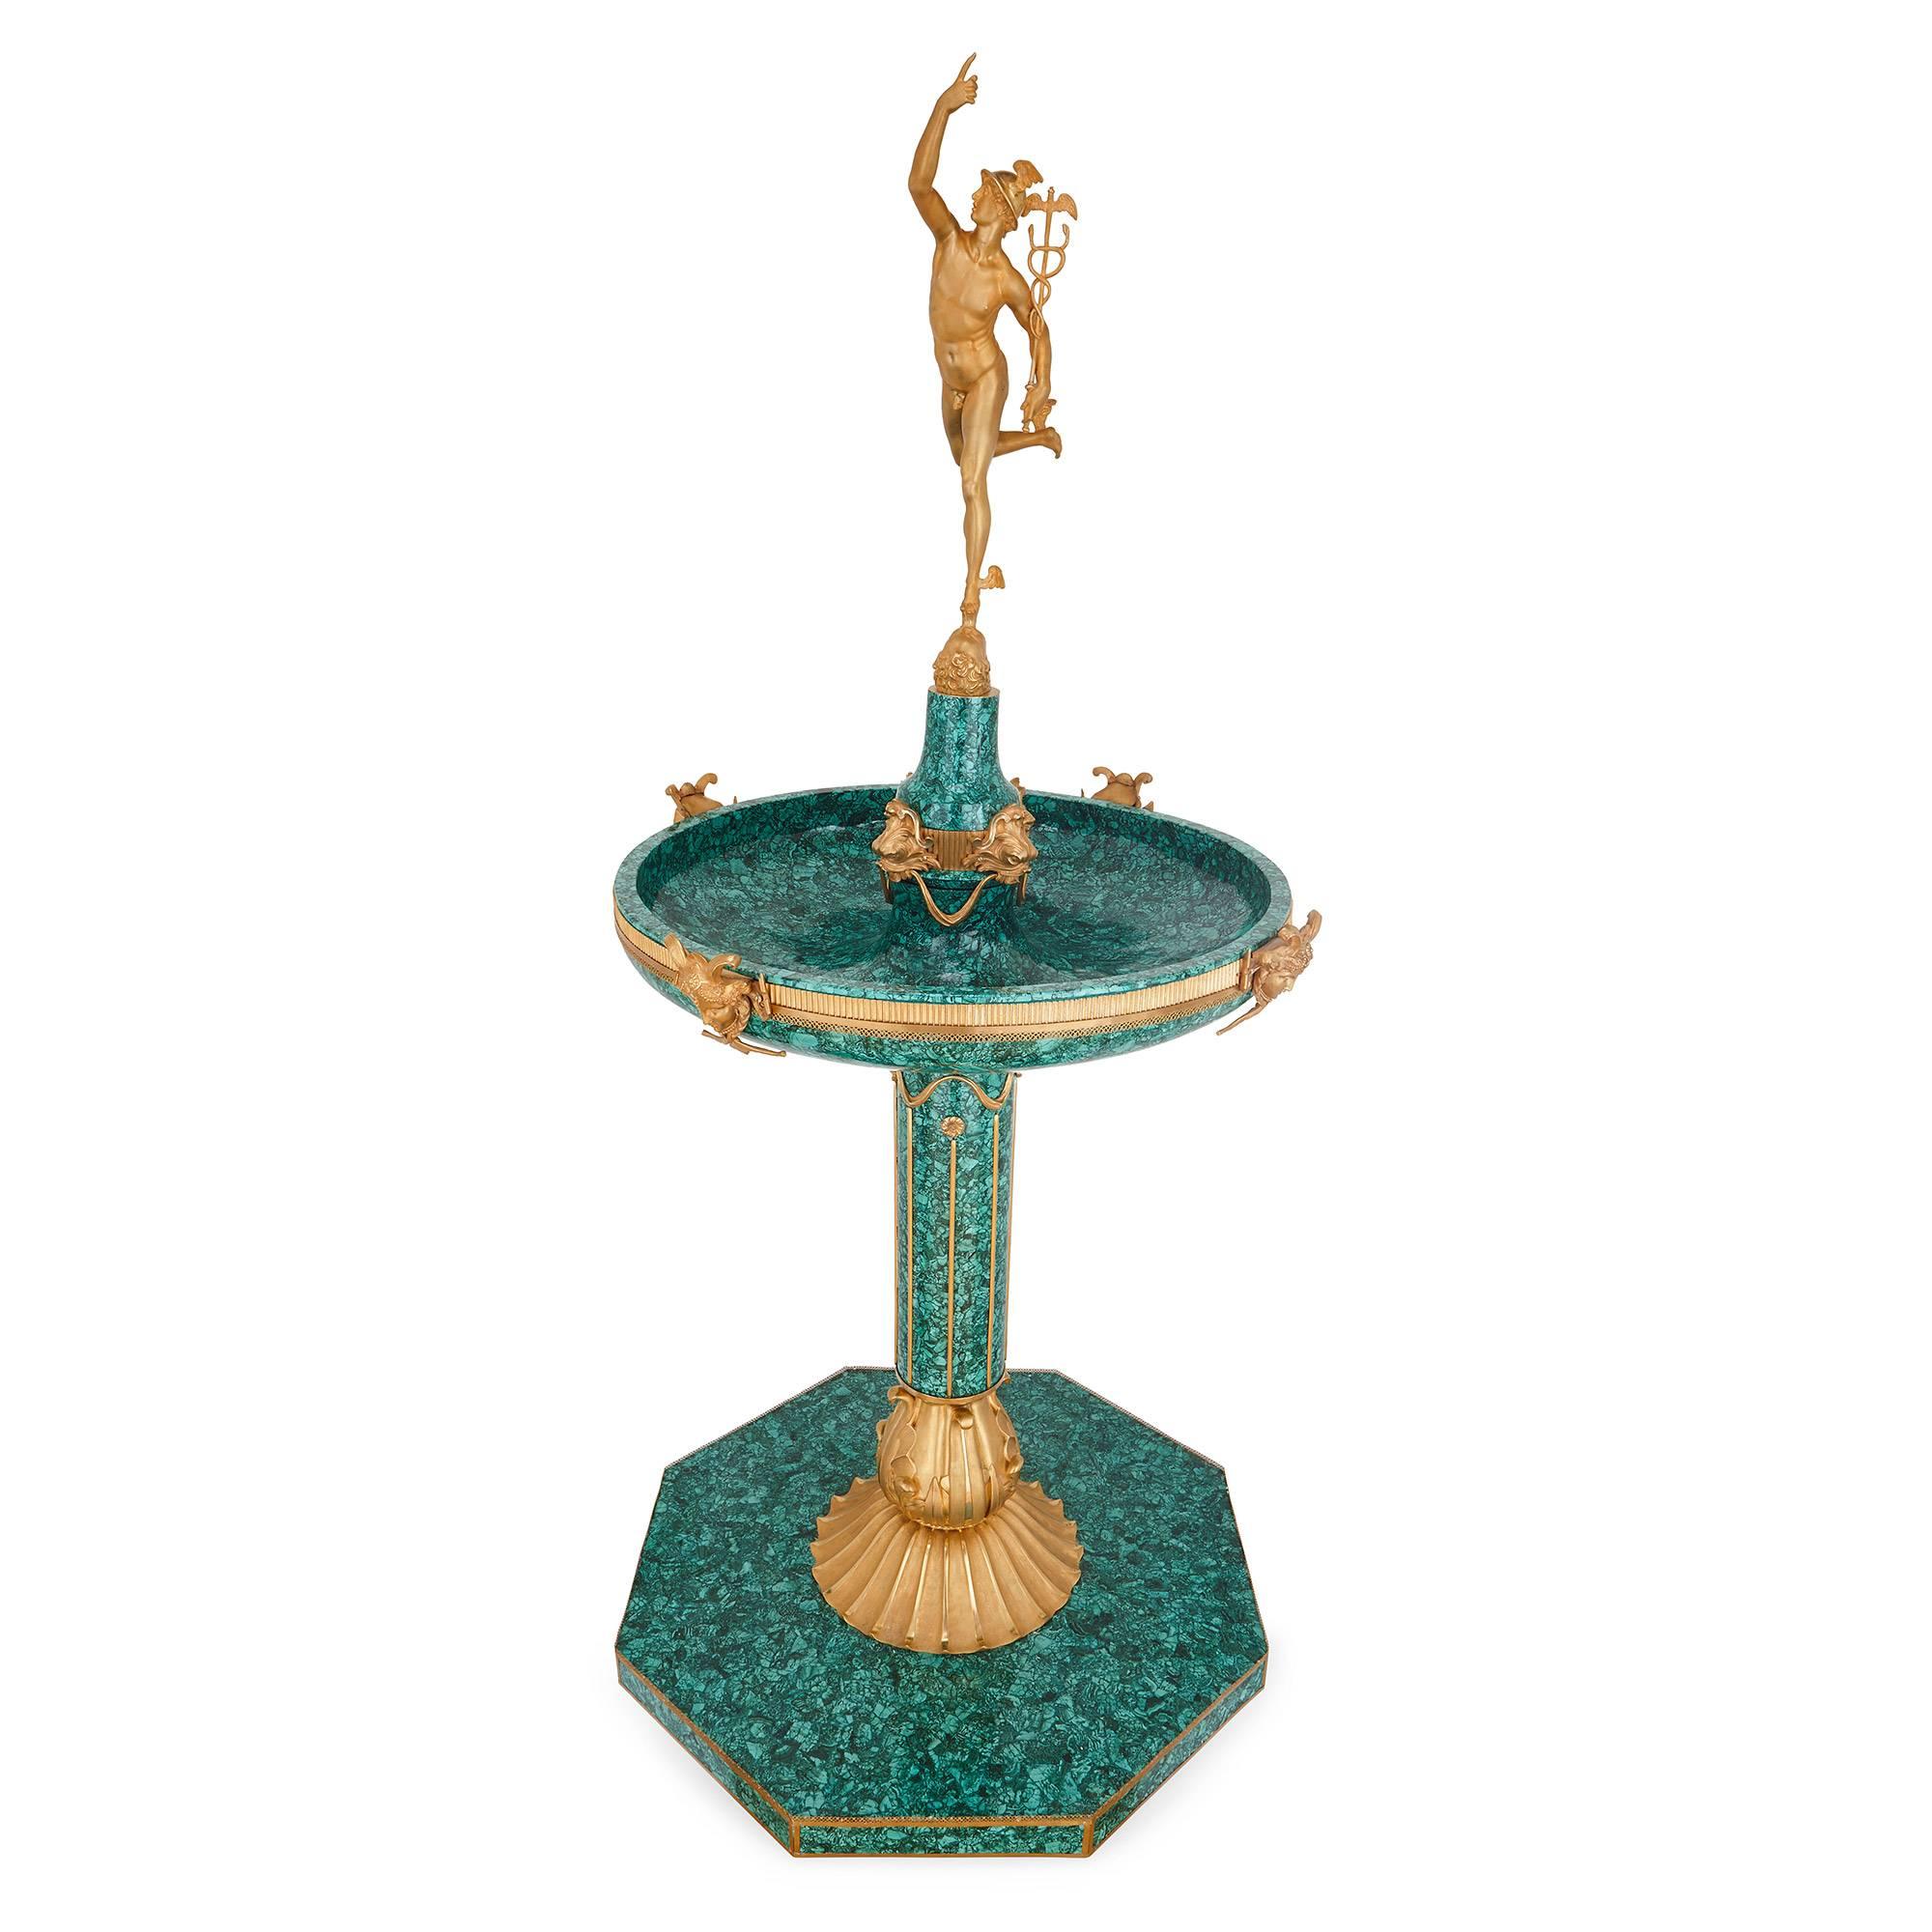 This Italian fountain showcases extremely skilled design and craftsmanship, with Classical detailing all-over. It dates to the late 19th century, with later malachite veneer. The fountain is mounted at the top with a gilt bronze statue of the Roman